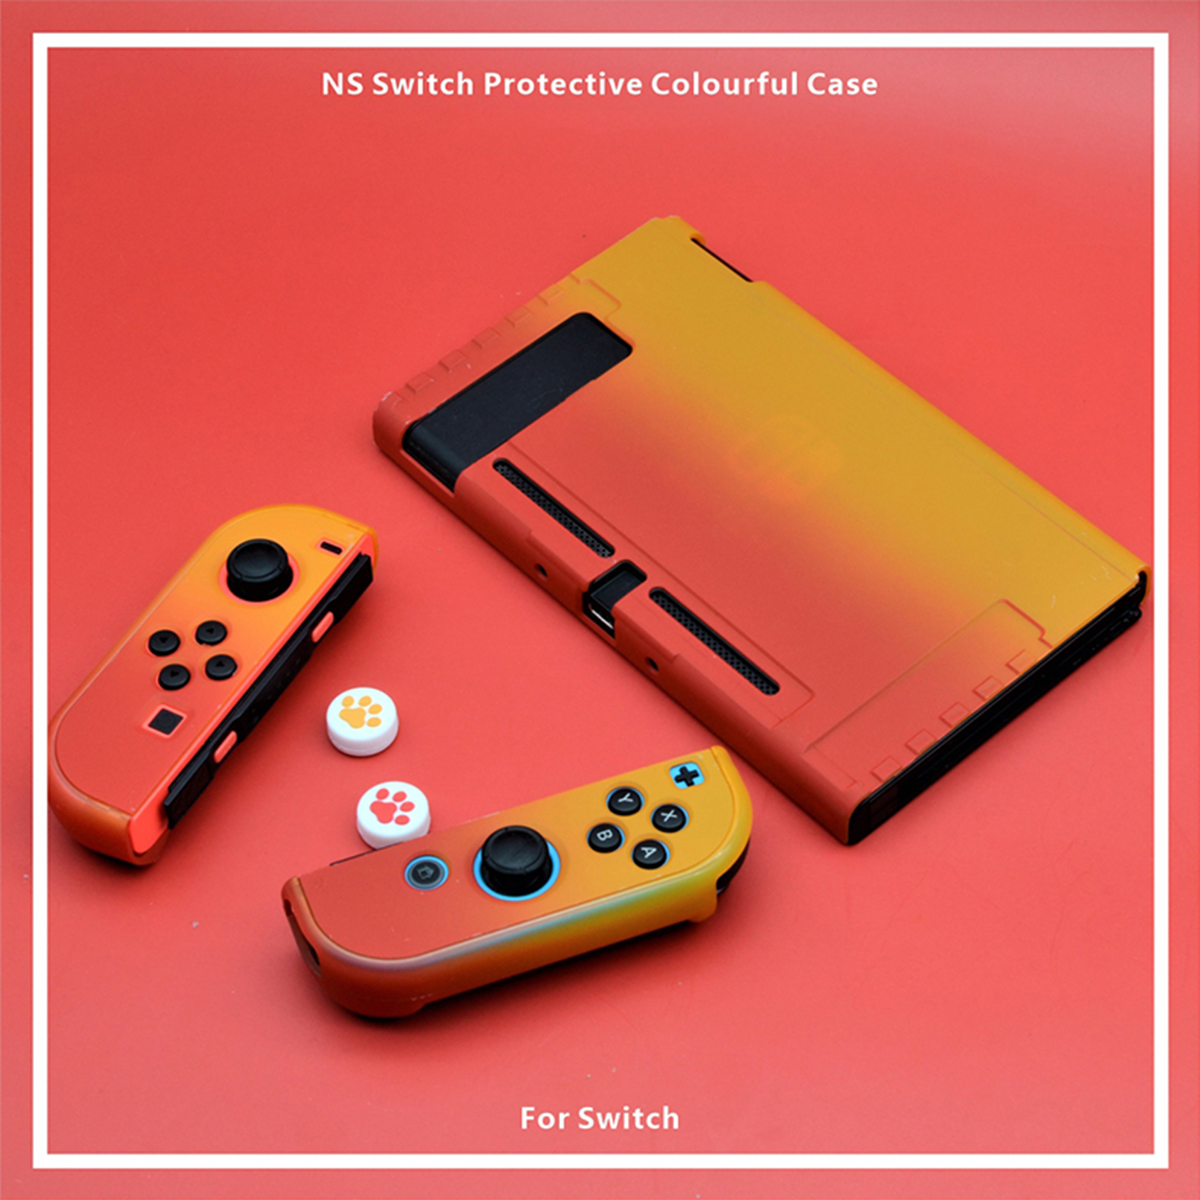 Colorful-Shockproof-Shell-Gradient-Case-Protector-for-Nintendo-Switch-Game-Console-Protective-Hard-C-1737853-2